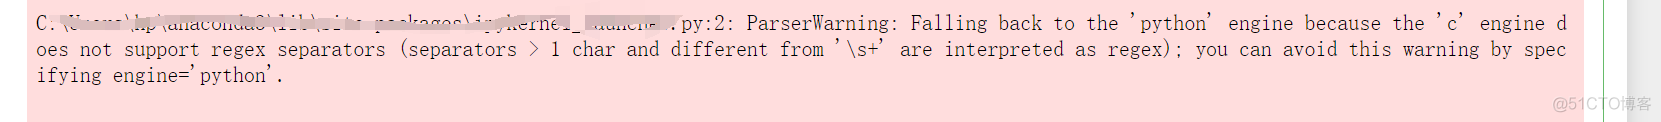 arserWarning: Falling back to the ‘python‘ engine because the ‘c‘ engine does not support regex sepa_c语言